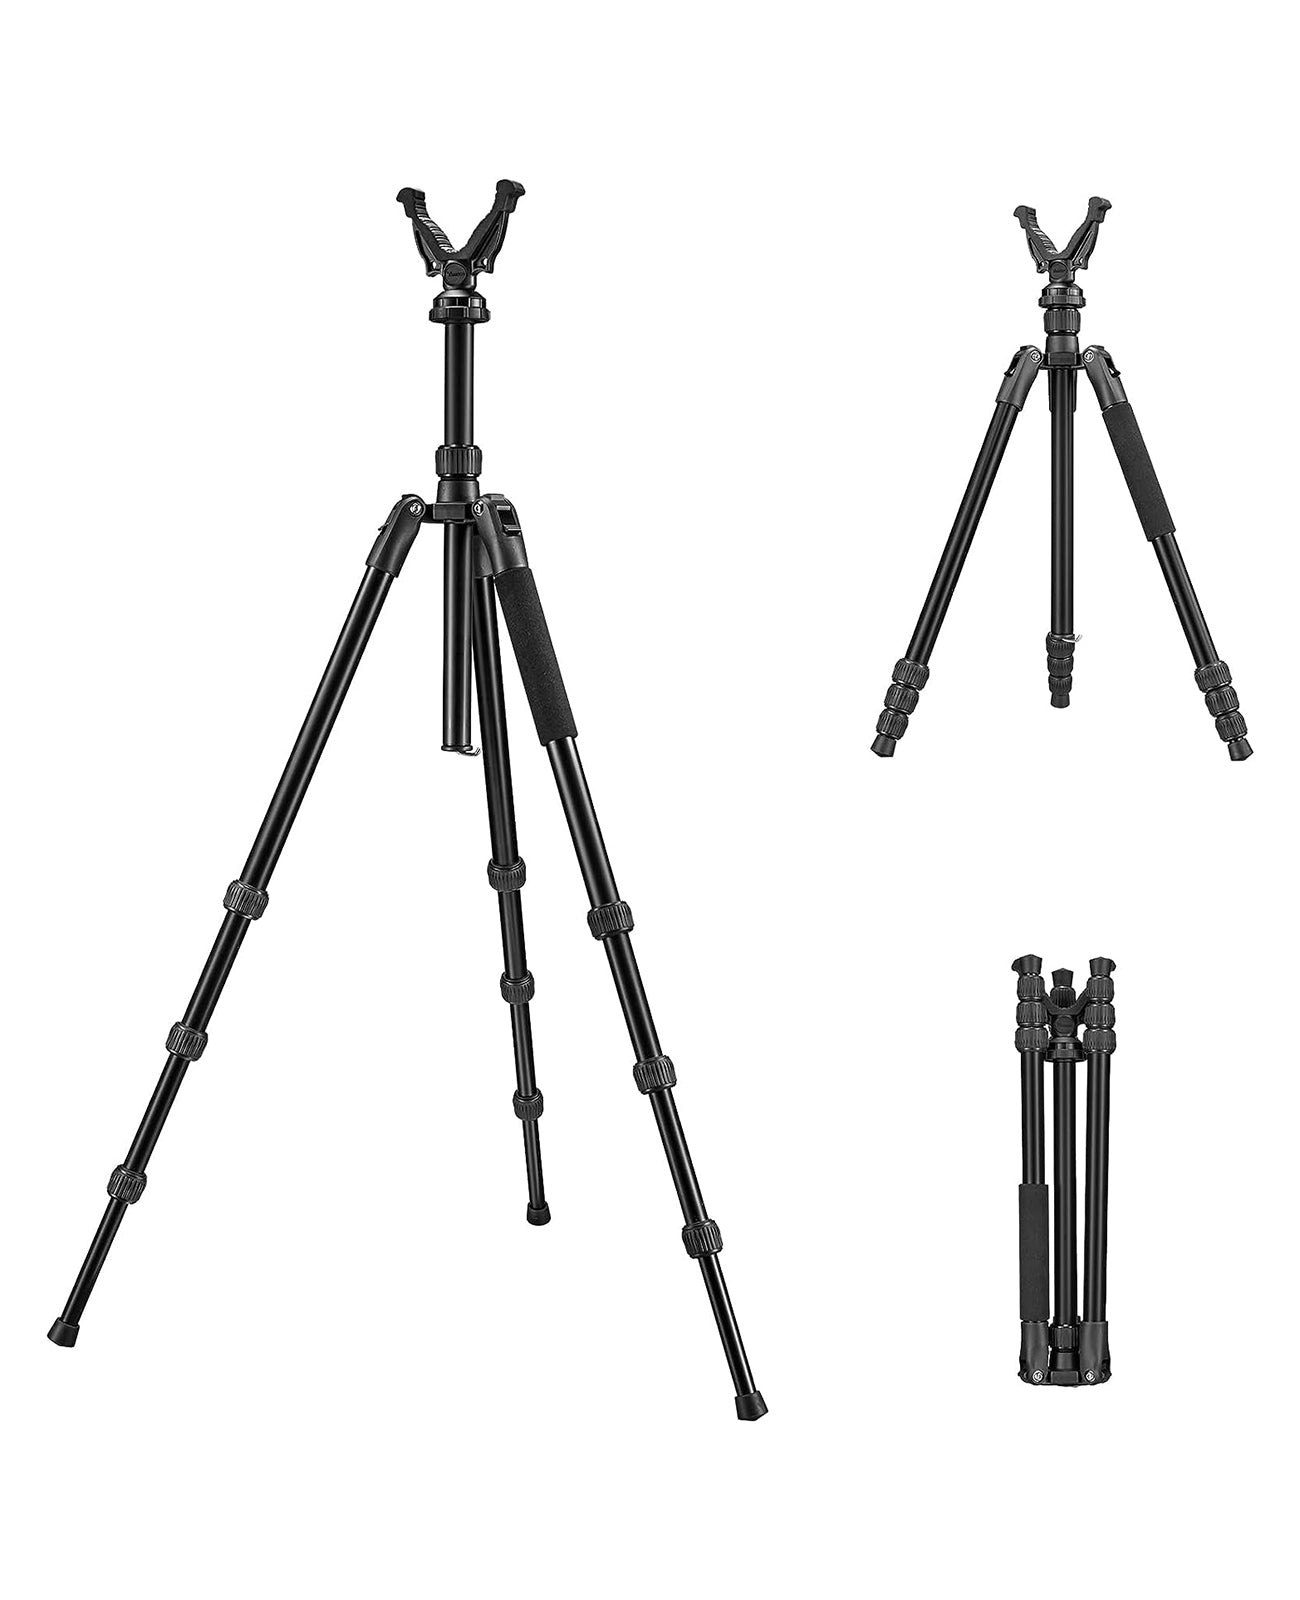 CVLIFE 3-in-1 Shooting Rest Tripod Shooting Stick Monopod with 360° Ru